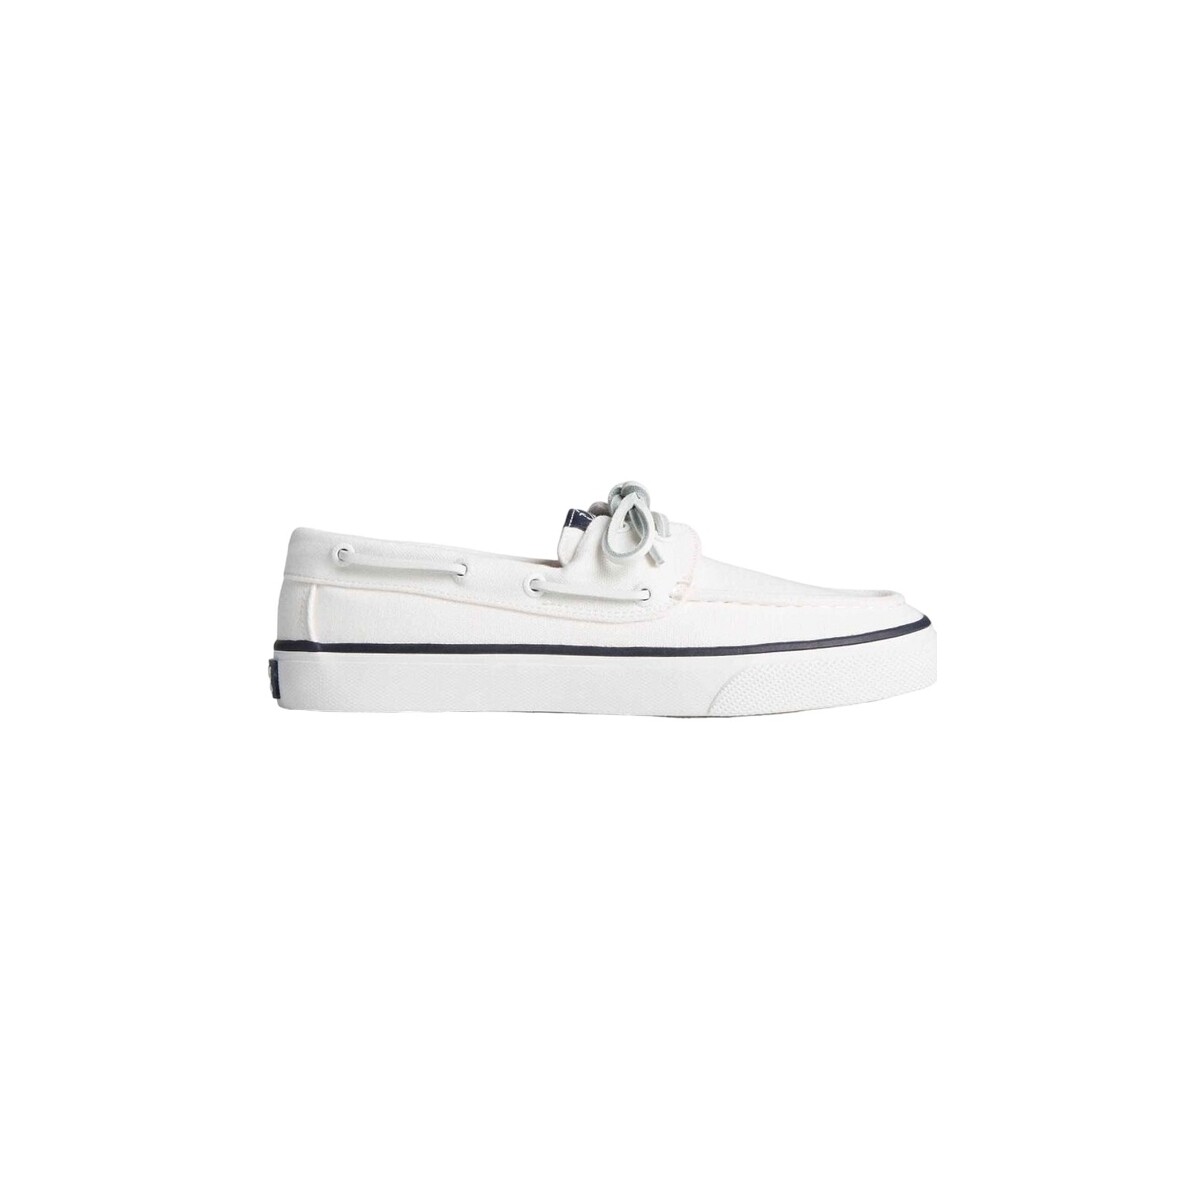 Scarpe Donna Sneakers Sperry Top-Sider BAHAMA 2.0 Bianco